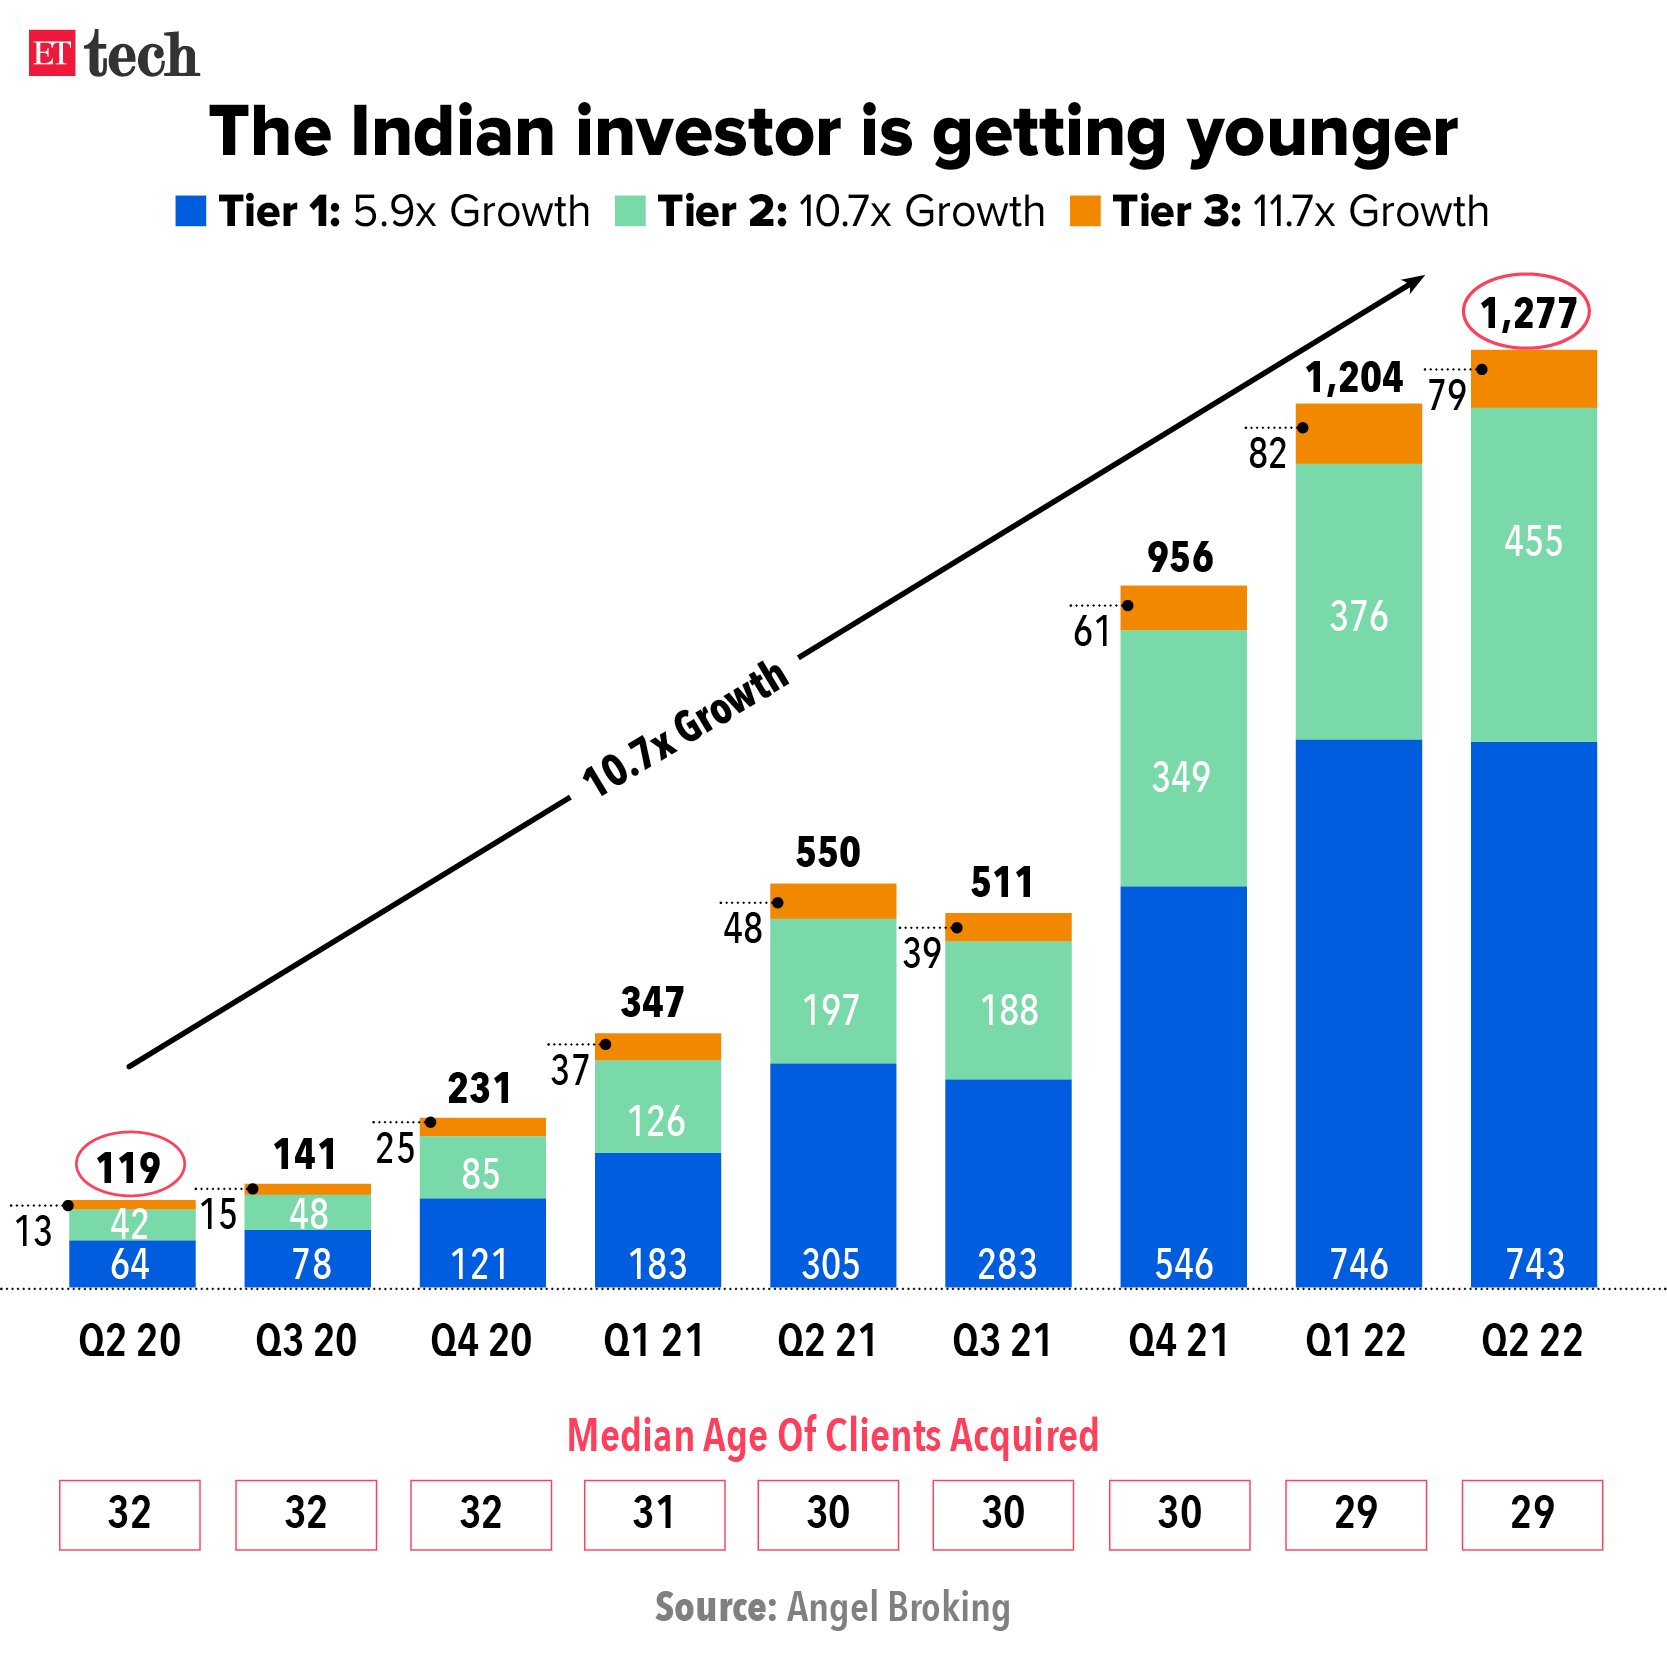 The Indian investor is getting younger